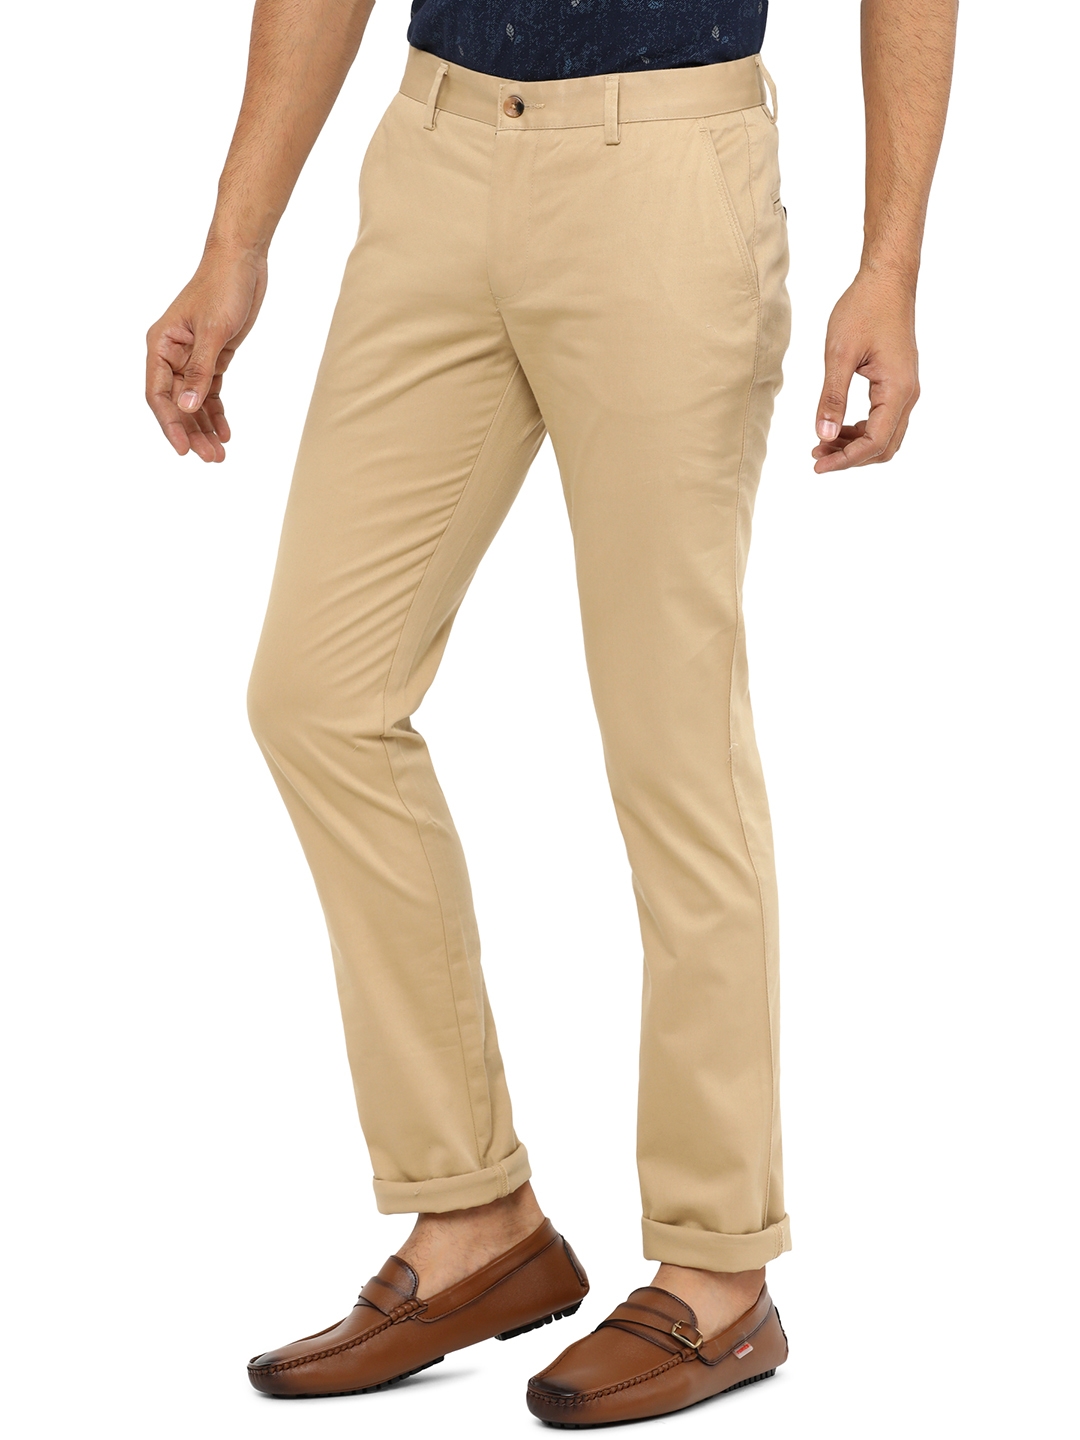 Greenfibre | Beige Solid Super Slim Fit Casual Trouser | Greenfibre 1